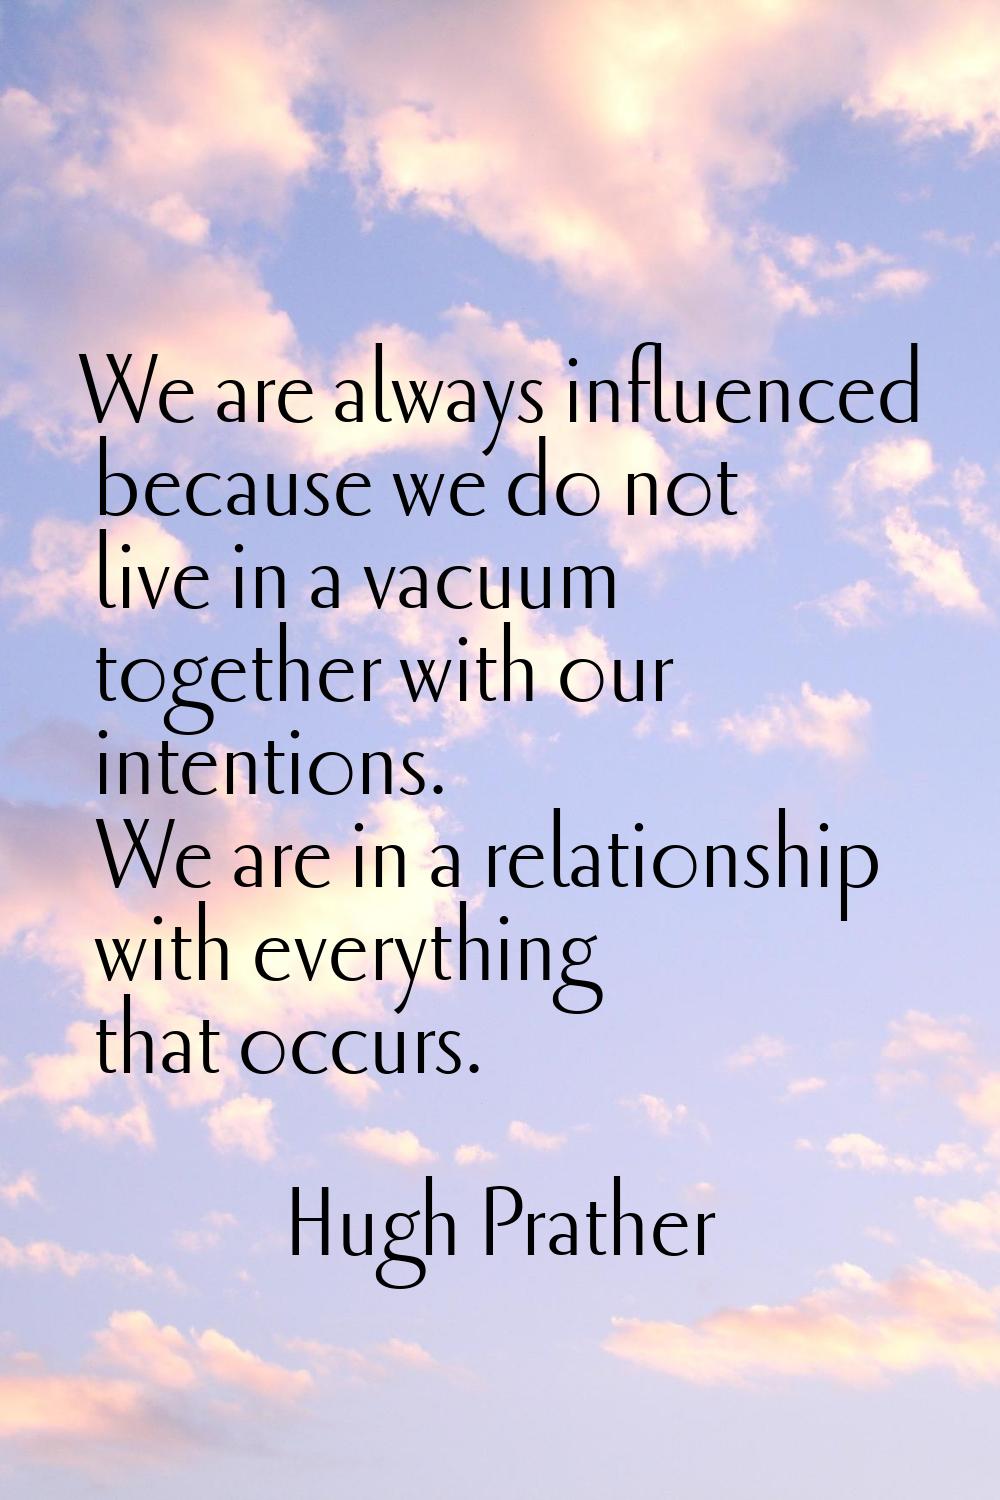 We are always influenced because we do not live in a vacuum together with our intentions. We are in